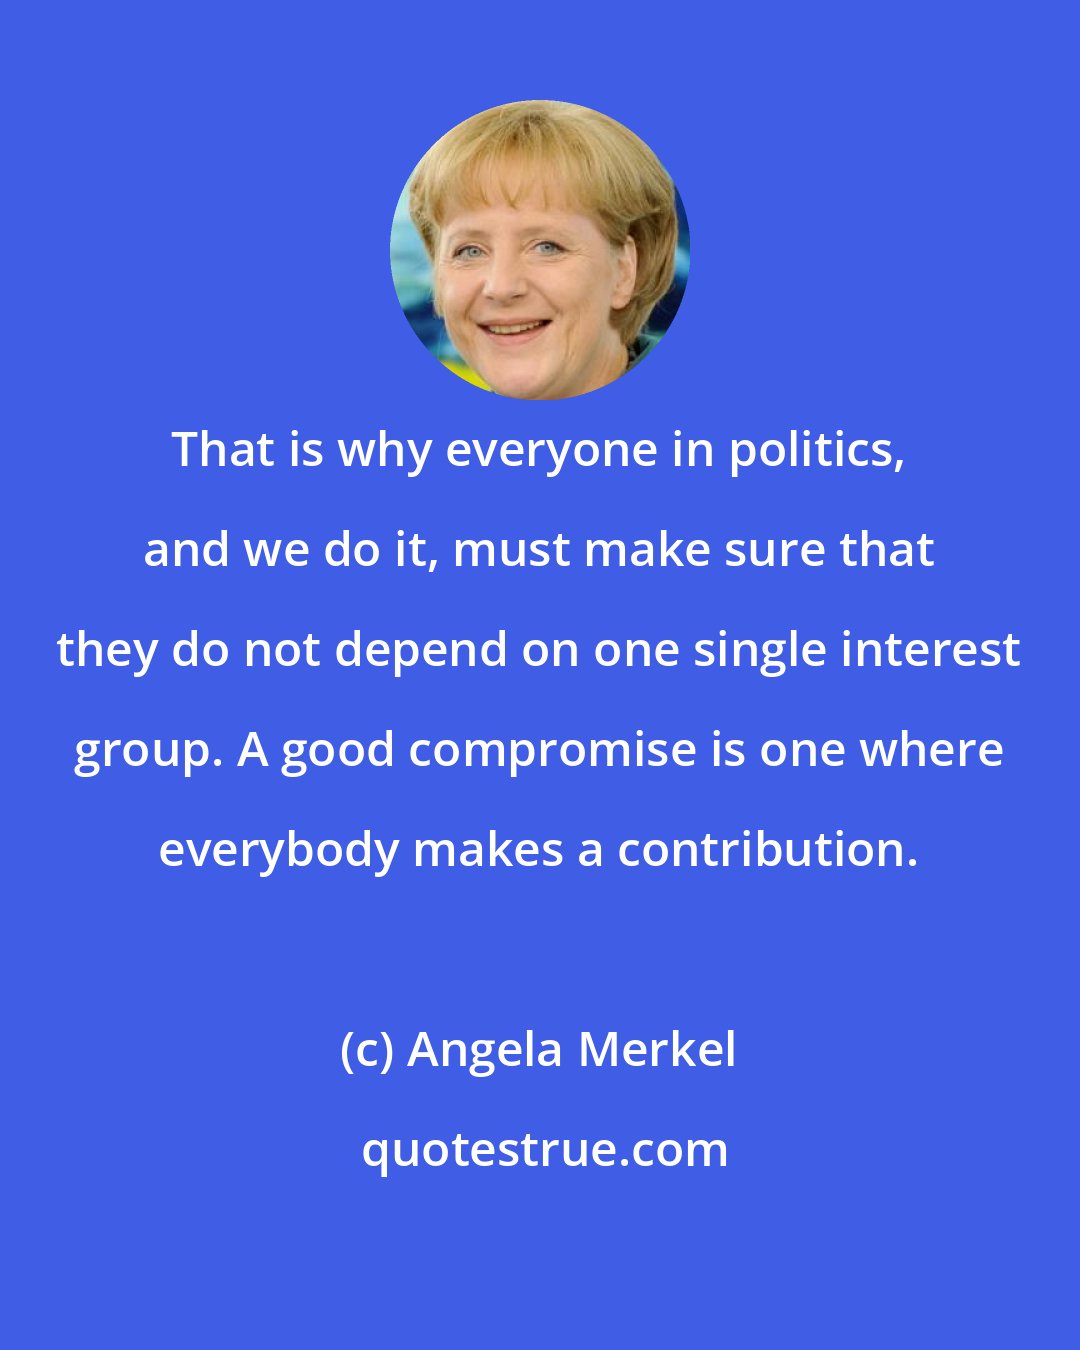 Angela Merkel: That is why everyone in politics, and we do it, must make sure that they do not depend on one single interest group. A good compromise is one where everybody makes a contribution.